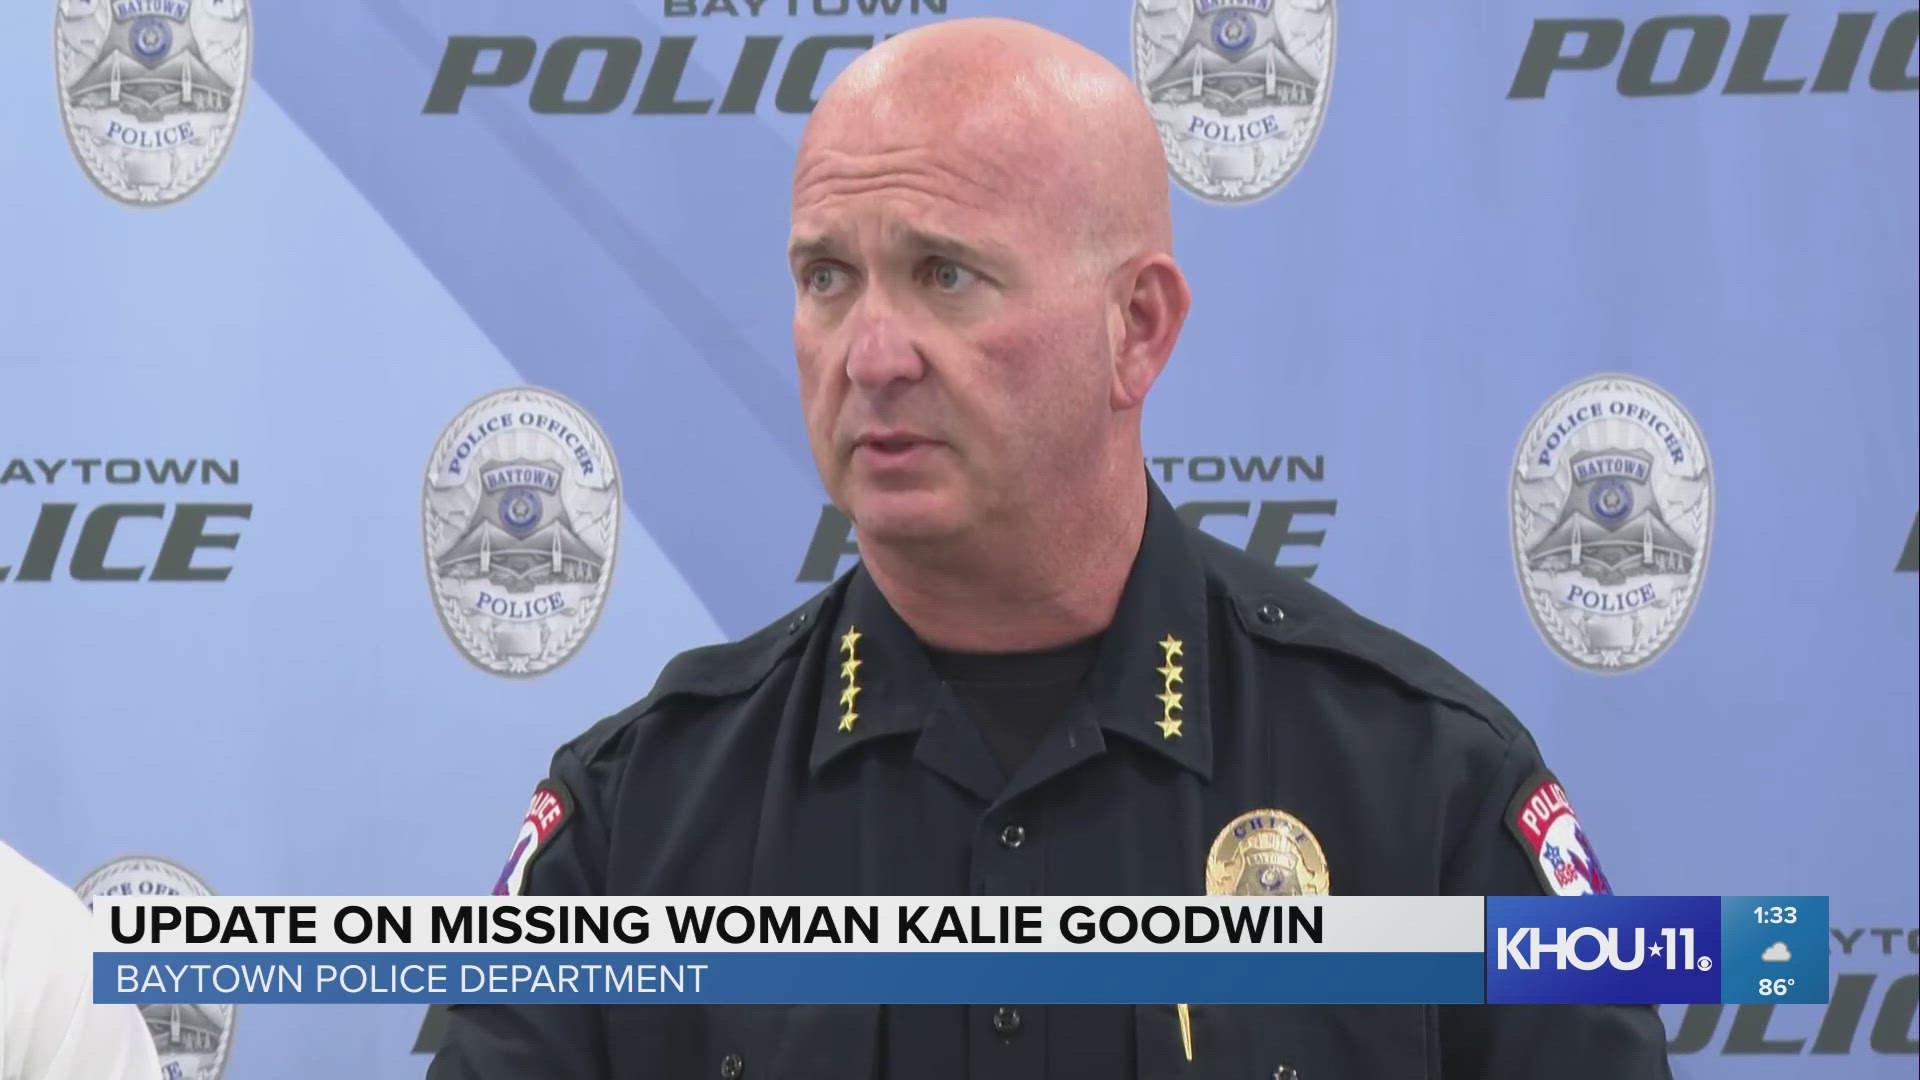 The Baytown Police Department said they hope to bring Kalie Goodwin back home safe.